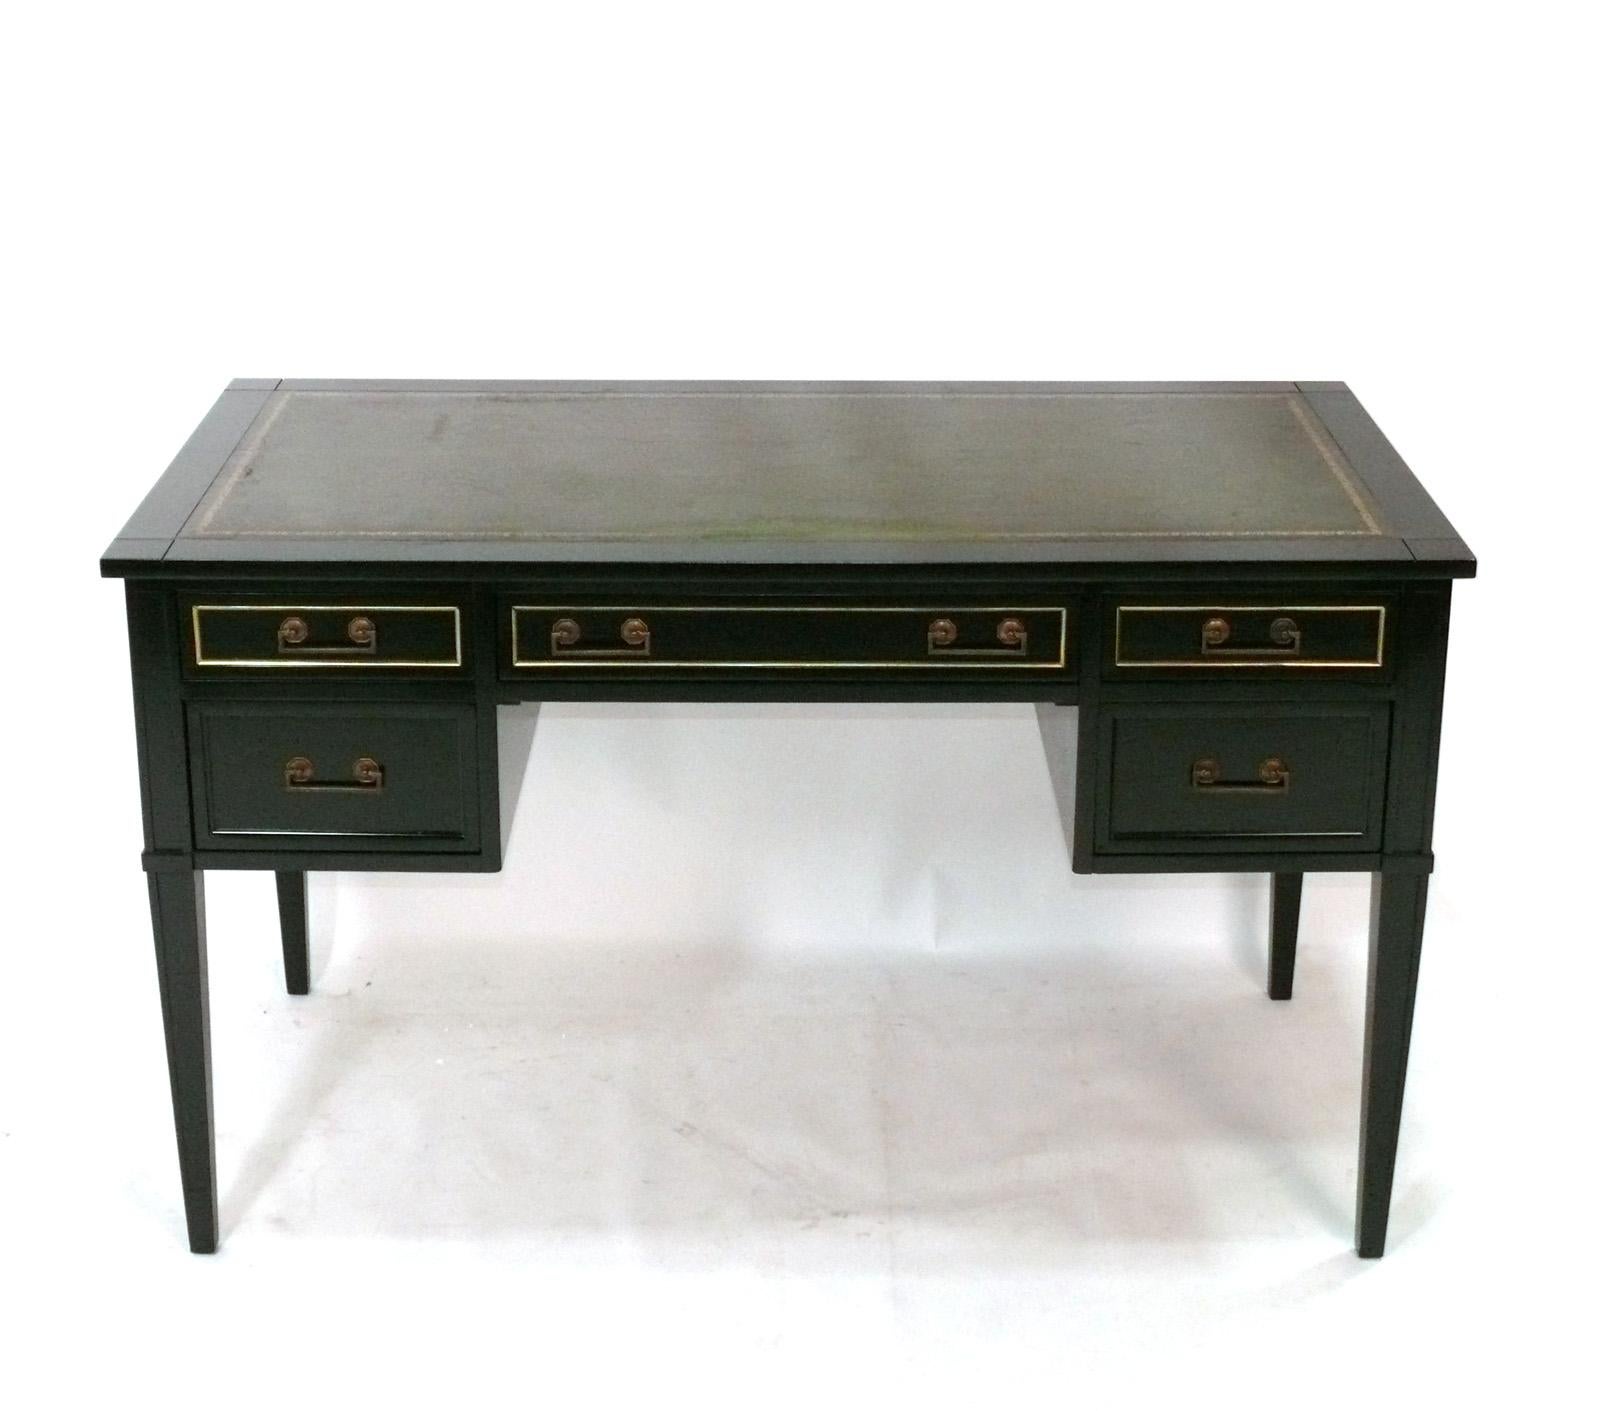 Elegant French Style Black Lacquer Desk with Inset Green Leather Top, probably American, circa 1950s. It has recently been refinished in black leather. The inset leather top is a beautiful deep green color and contrasts well with the black lacquer.